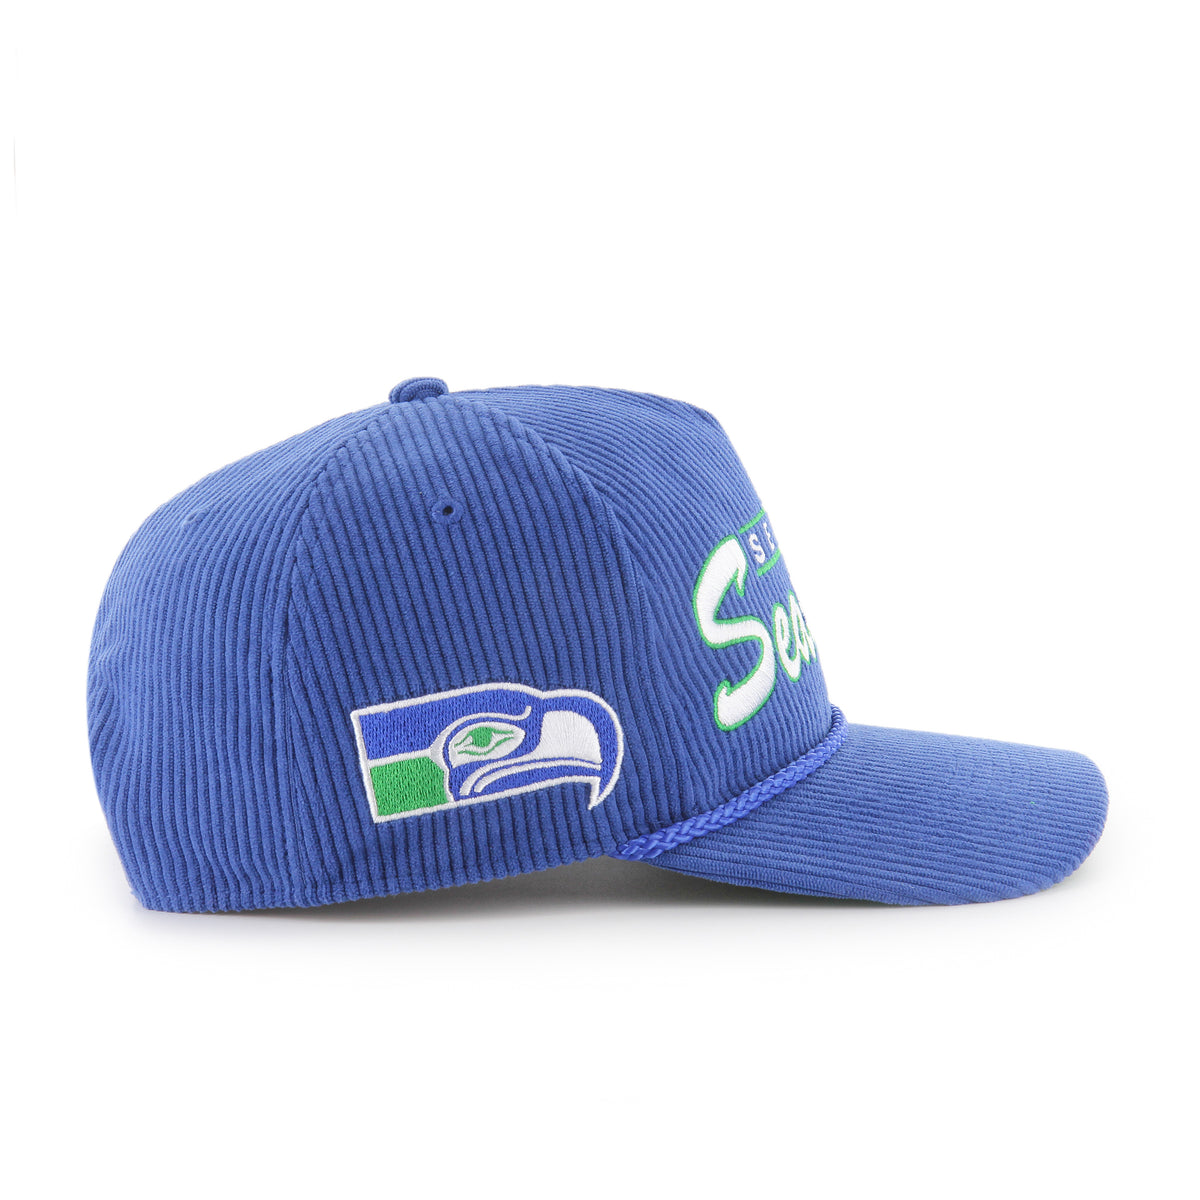 SEATTLE SEAHAWKS HISTORIC GRIDIRON '47 HITCH RELAXED FIT